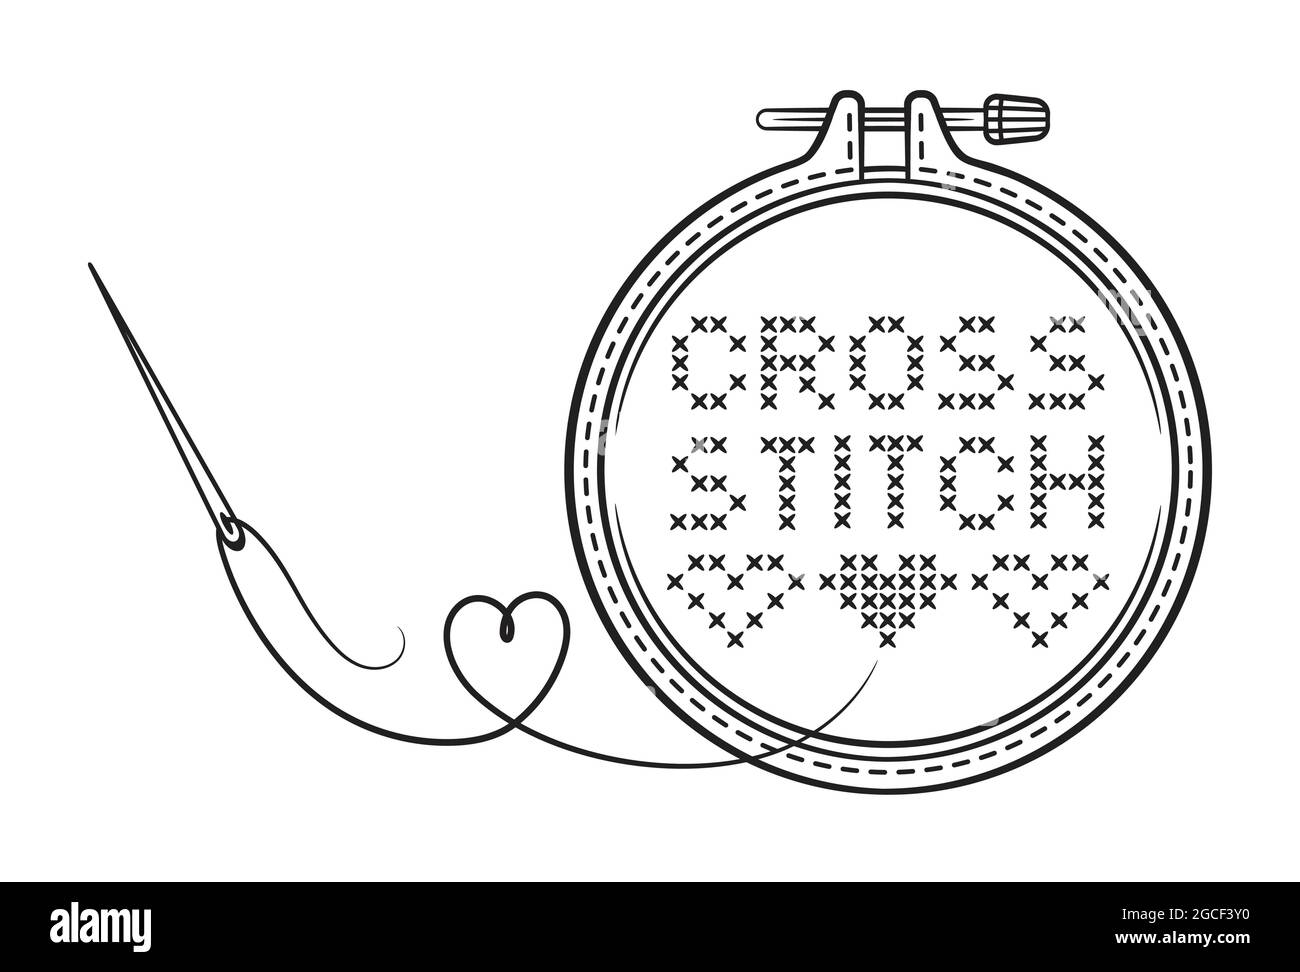 Tools For Cross Stitch Threads A Hoop For Embroidery A Canvas And Needle On  White Wooden Background Stock Photo - Download Image Now - iStock